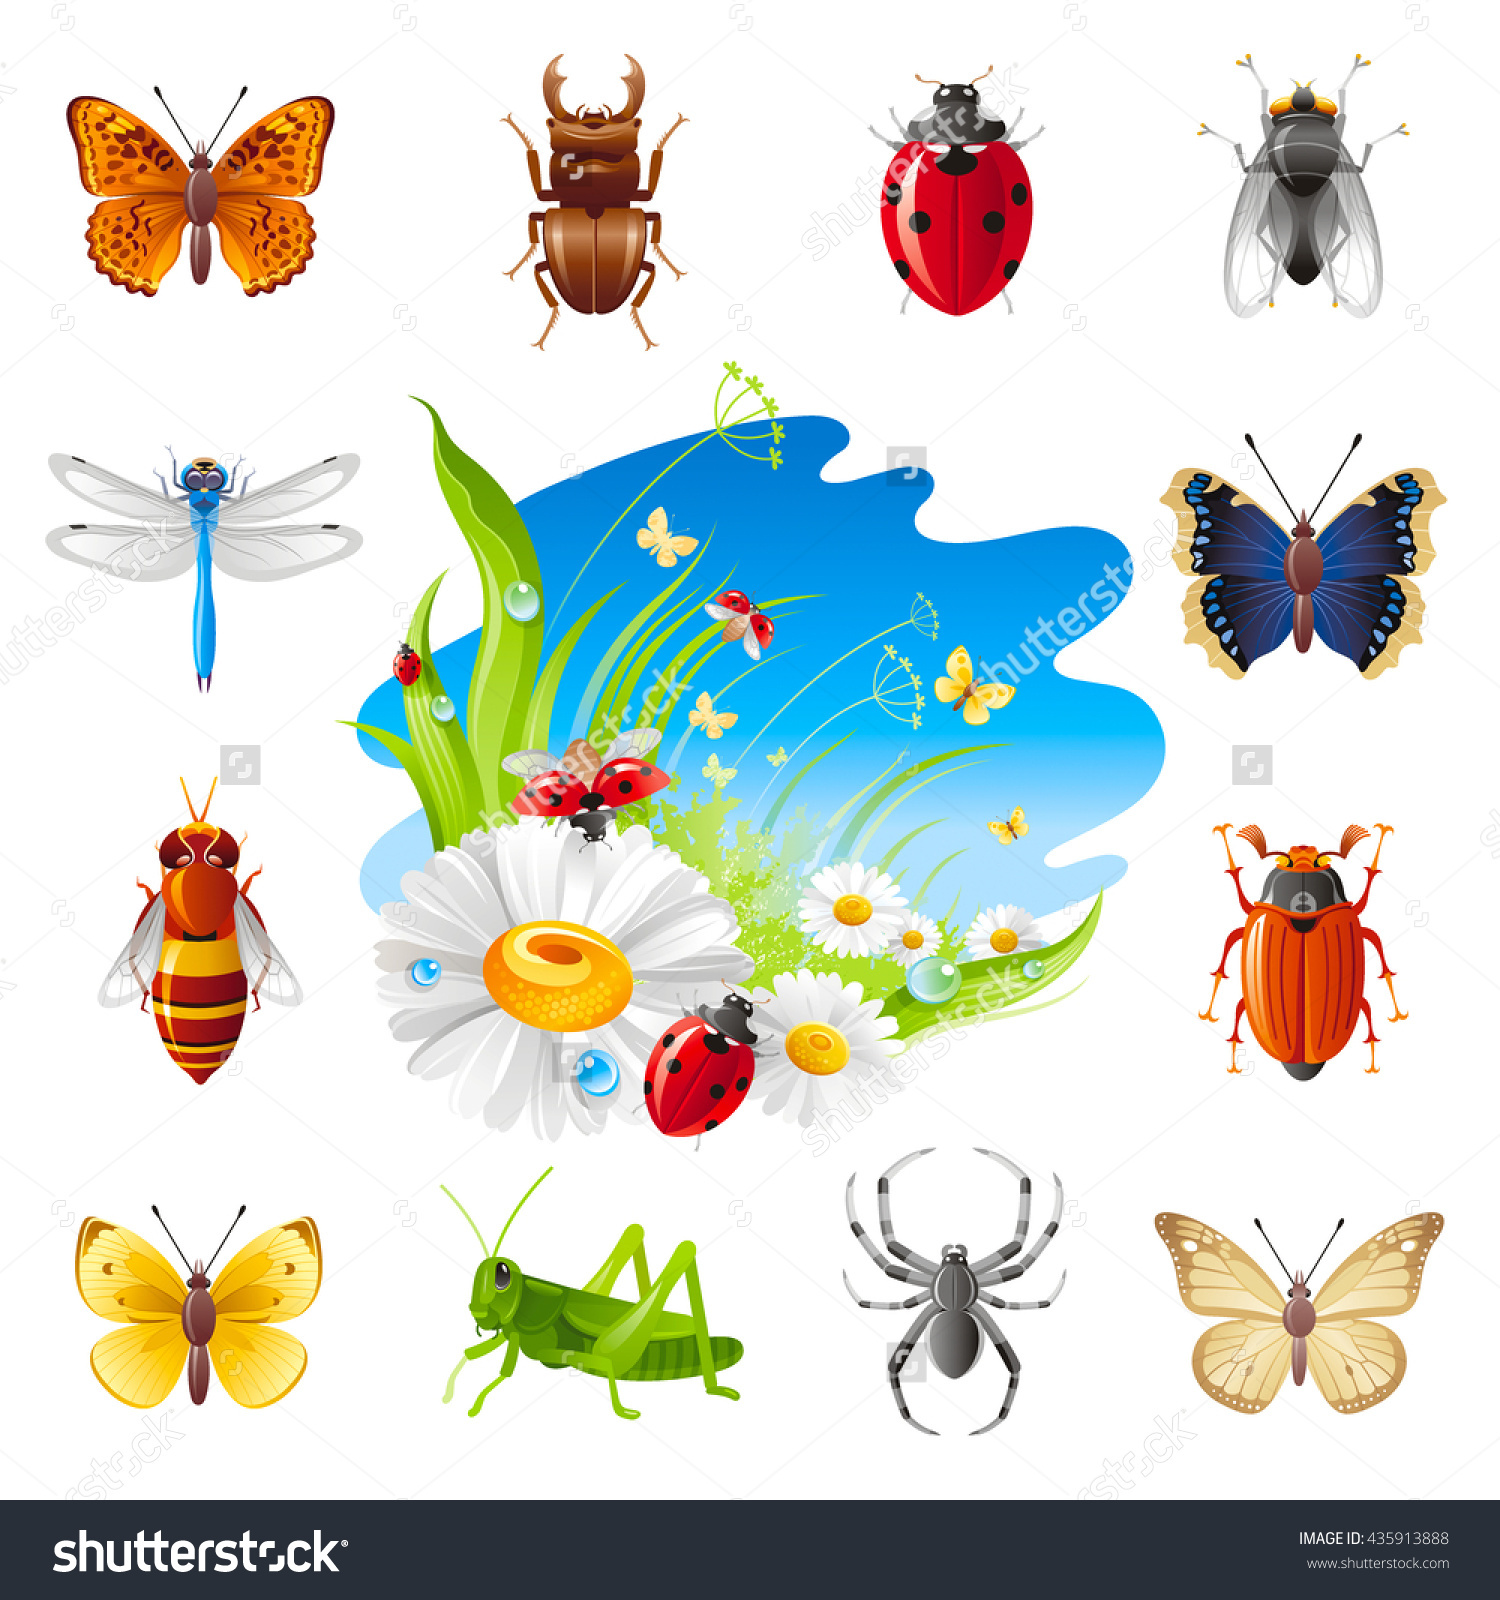 Insect Summer Nature Icon Set Illustration Stock Vector 435913888.